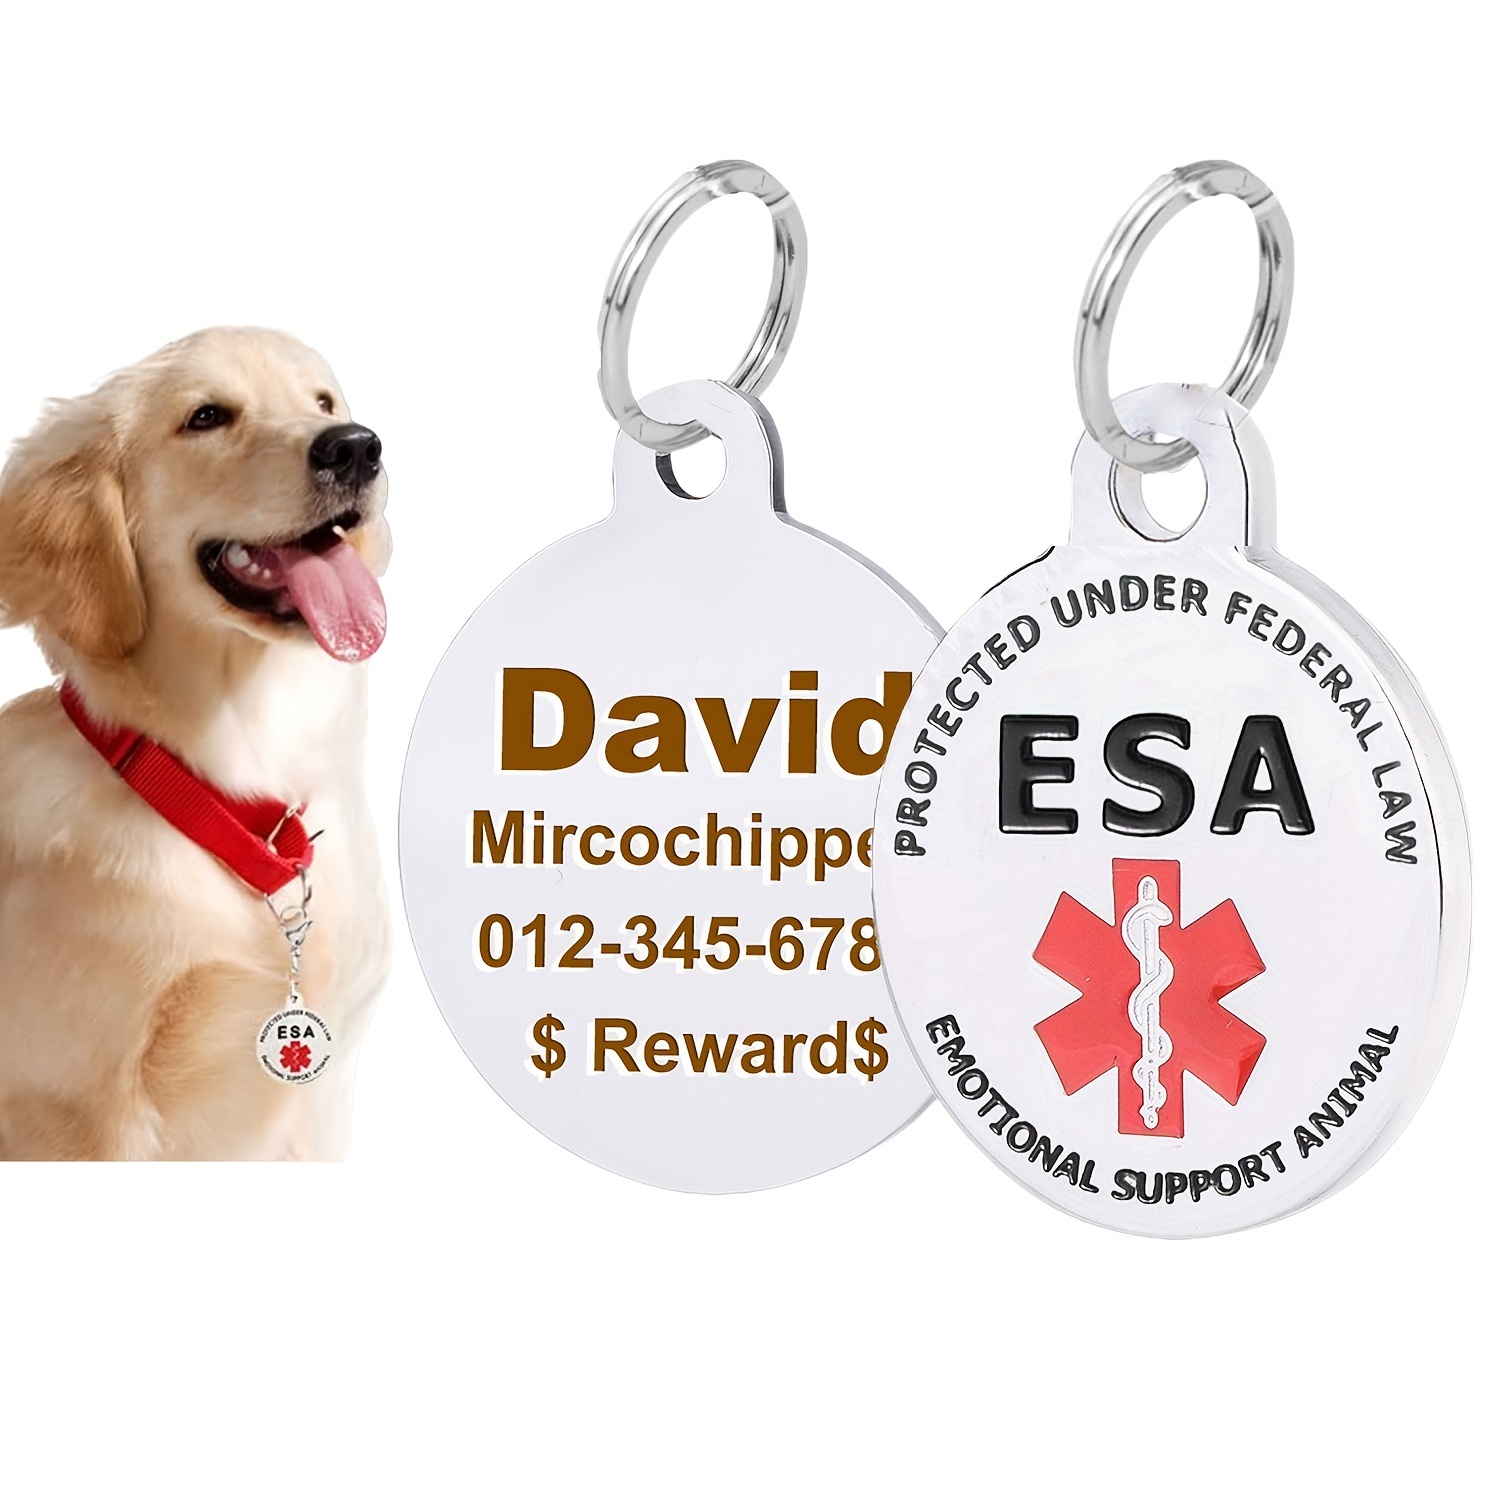 ESA or Service Dog ID Holder  Leather ID Holder with Lanyard